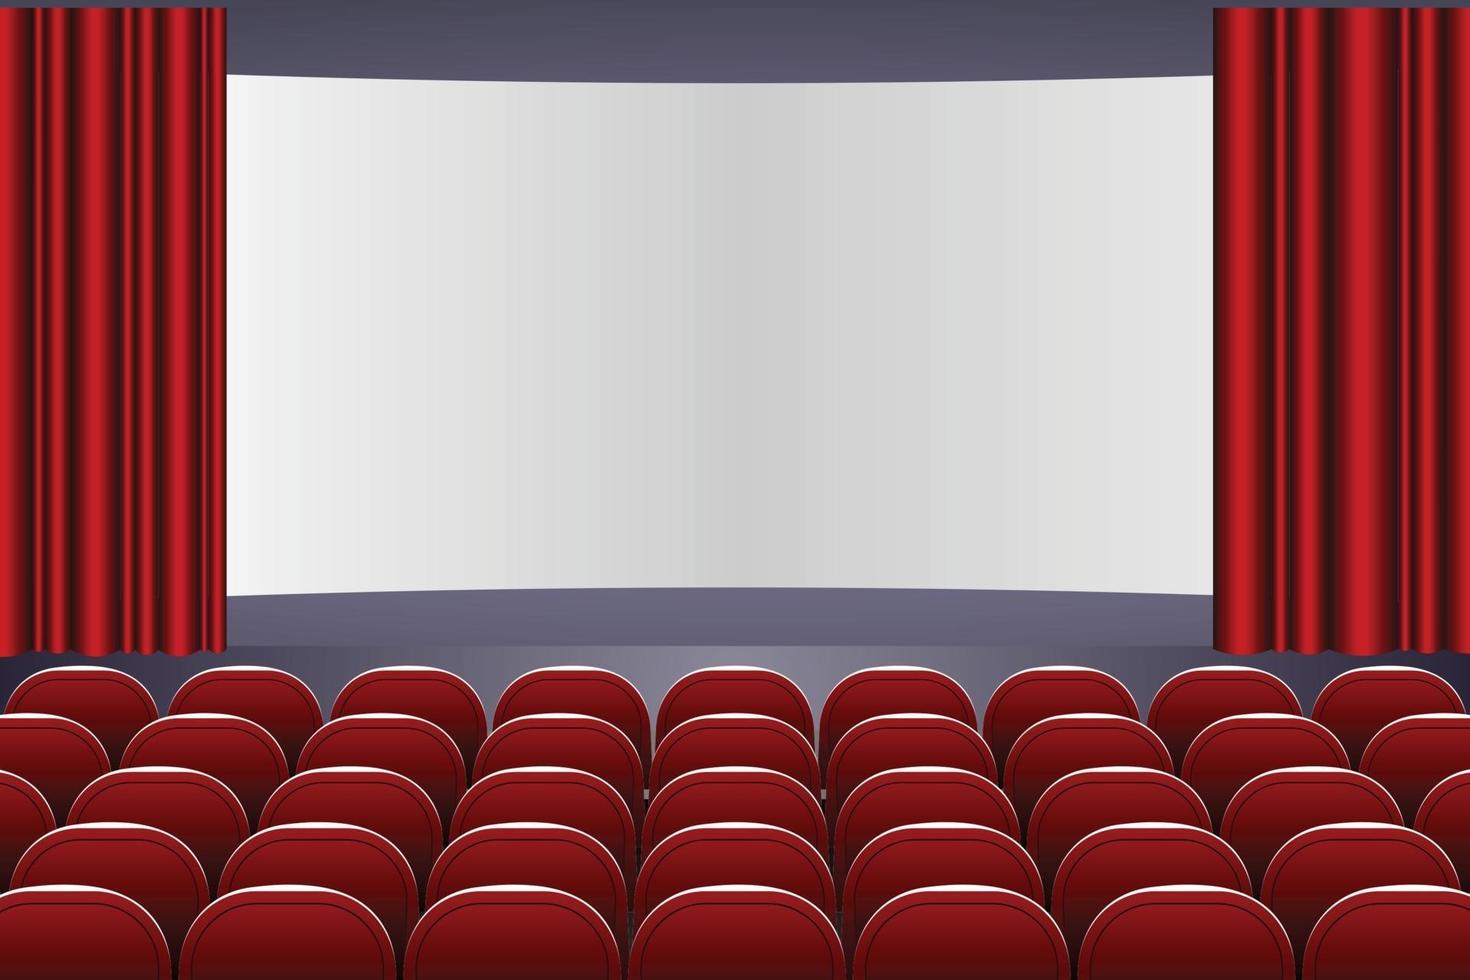 Theater auditorium with rows of red seats and stage with curtain vector